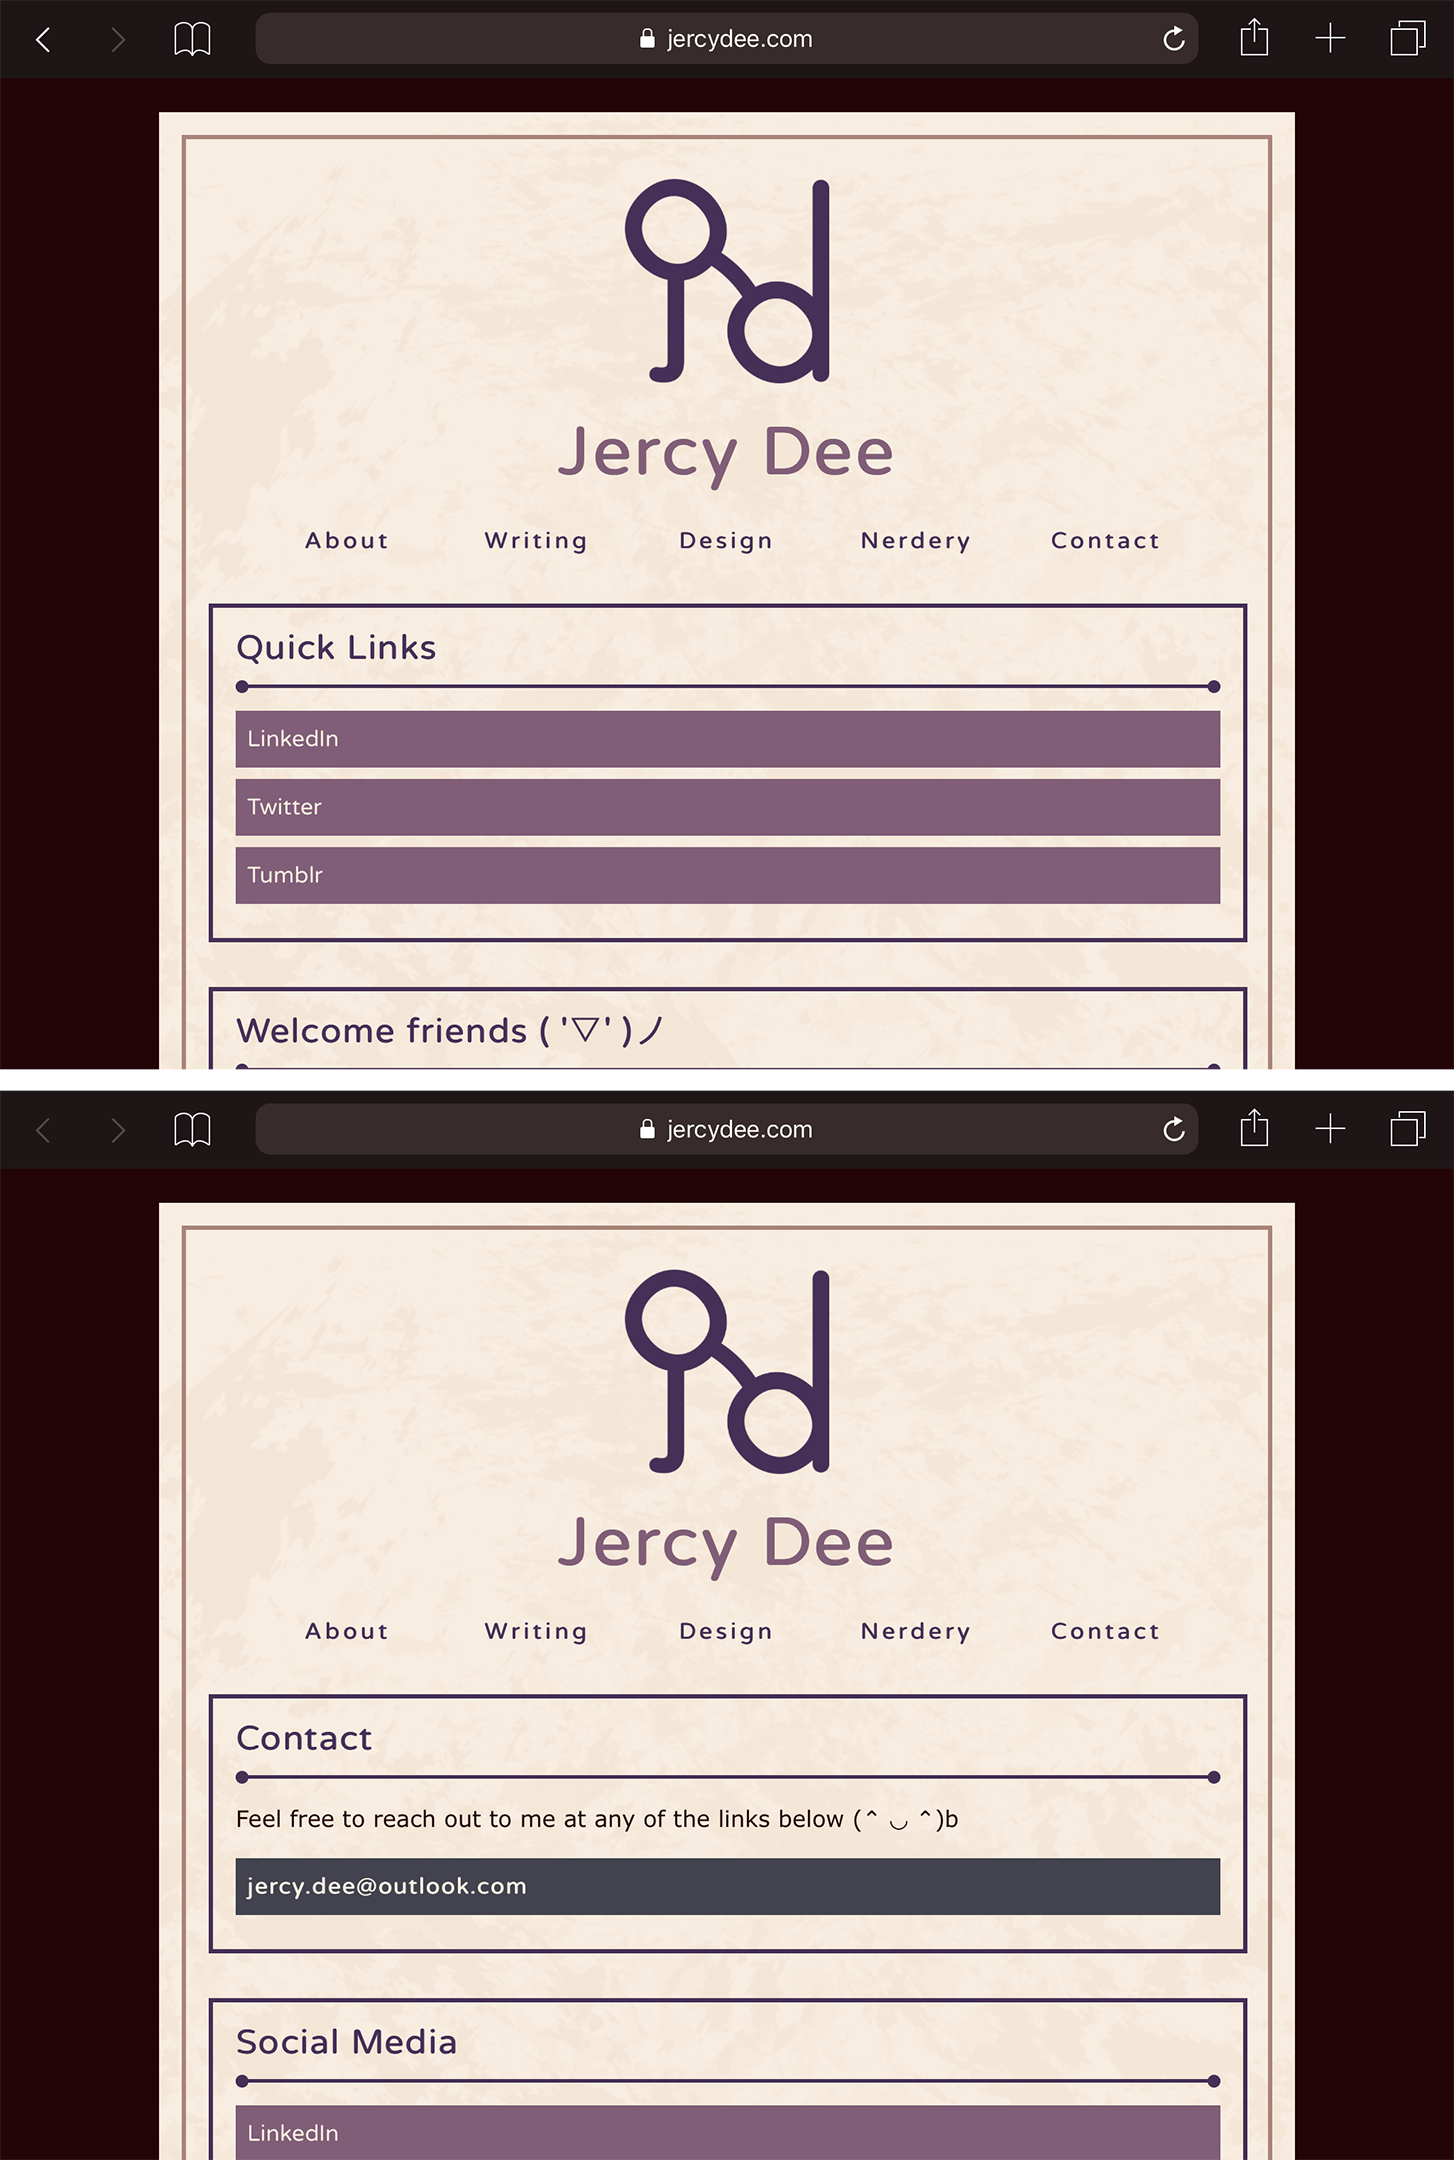 A digital collage of screenshots of jercydee.com's Homepage and Contact page on a tablet.